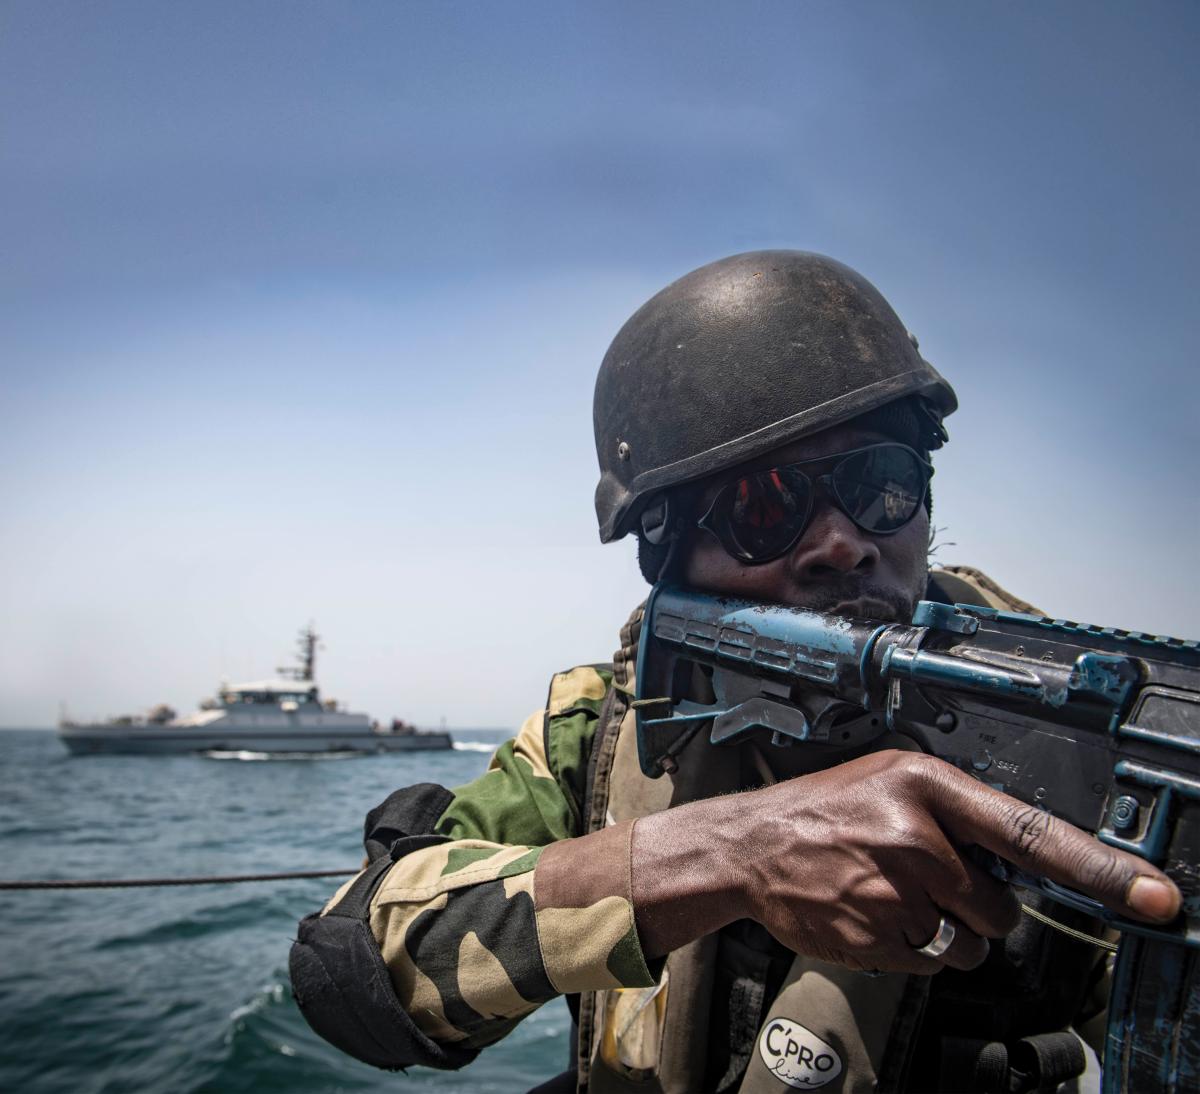 A Senegalese sailor participates in a visit, board, search and seizure training scenario aboard the Gambian navy GNS Kuntah Kinteh during Exercise Obangame Express 2019